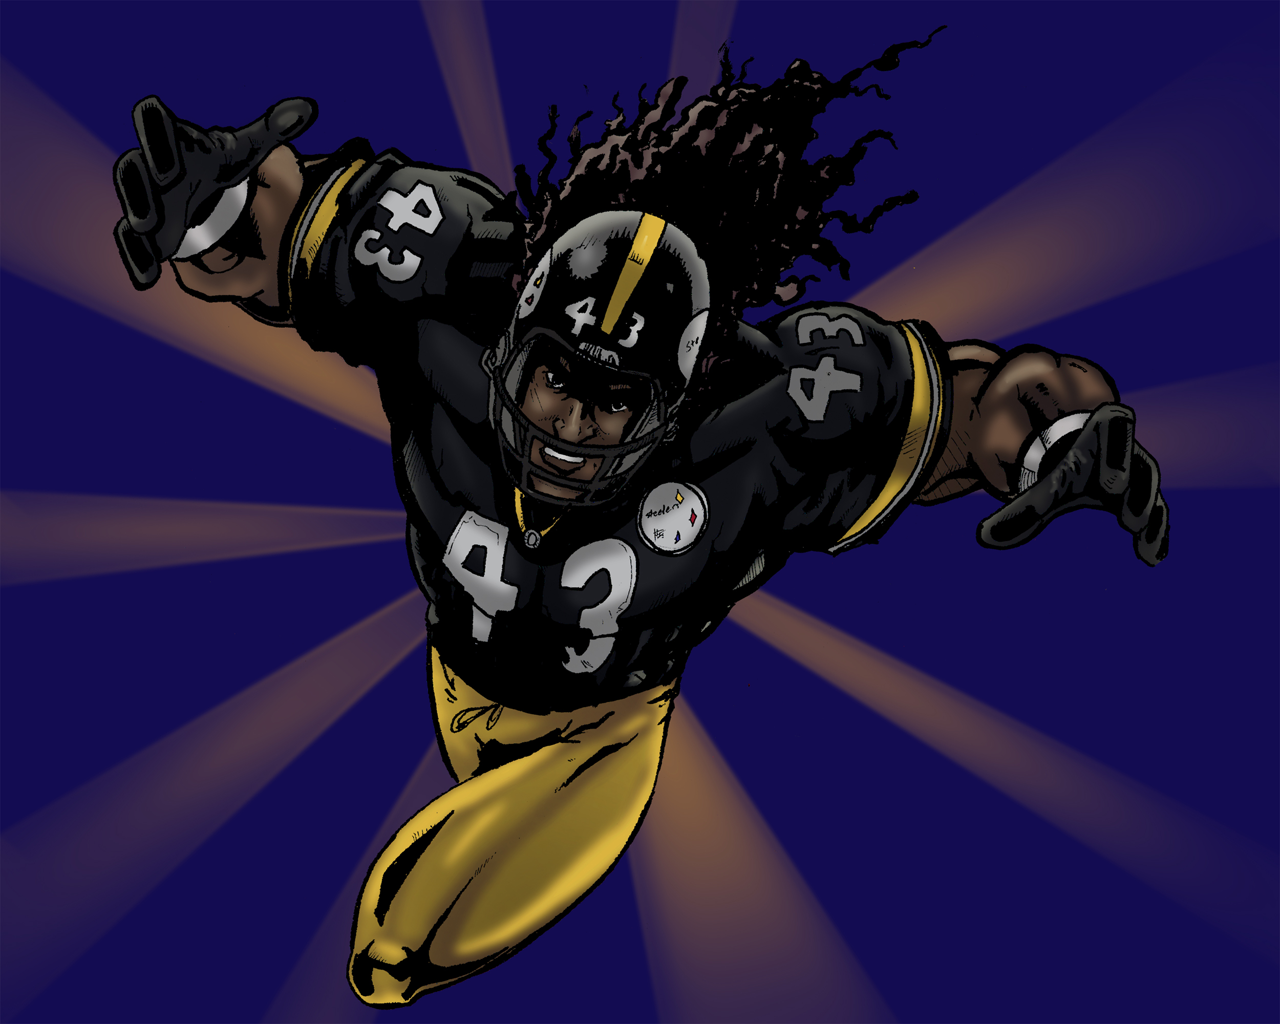 Steelers Wallpaper Background Pittsburgh